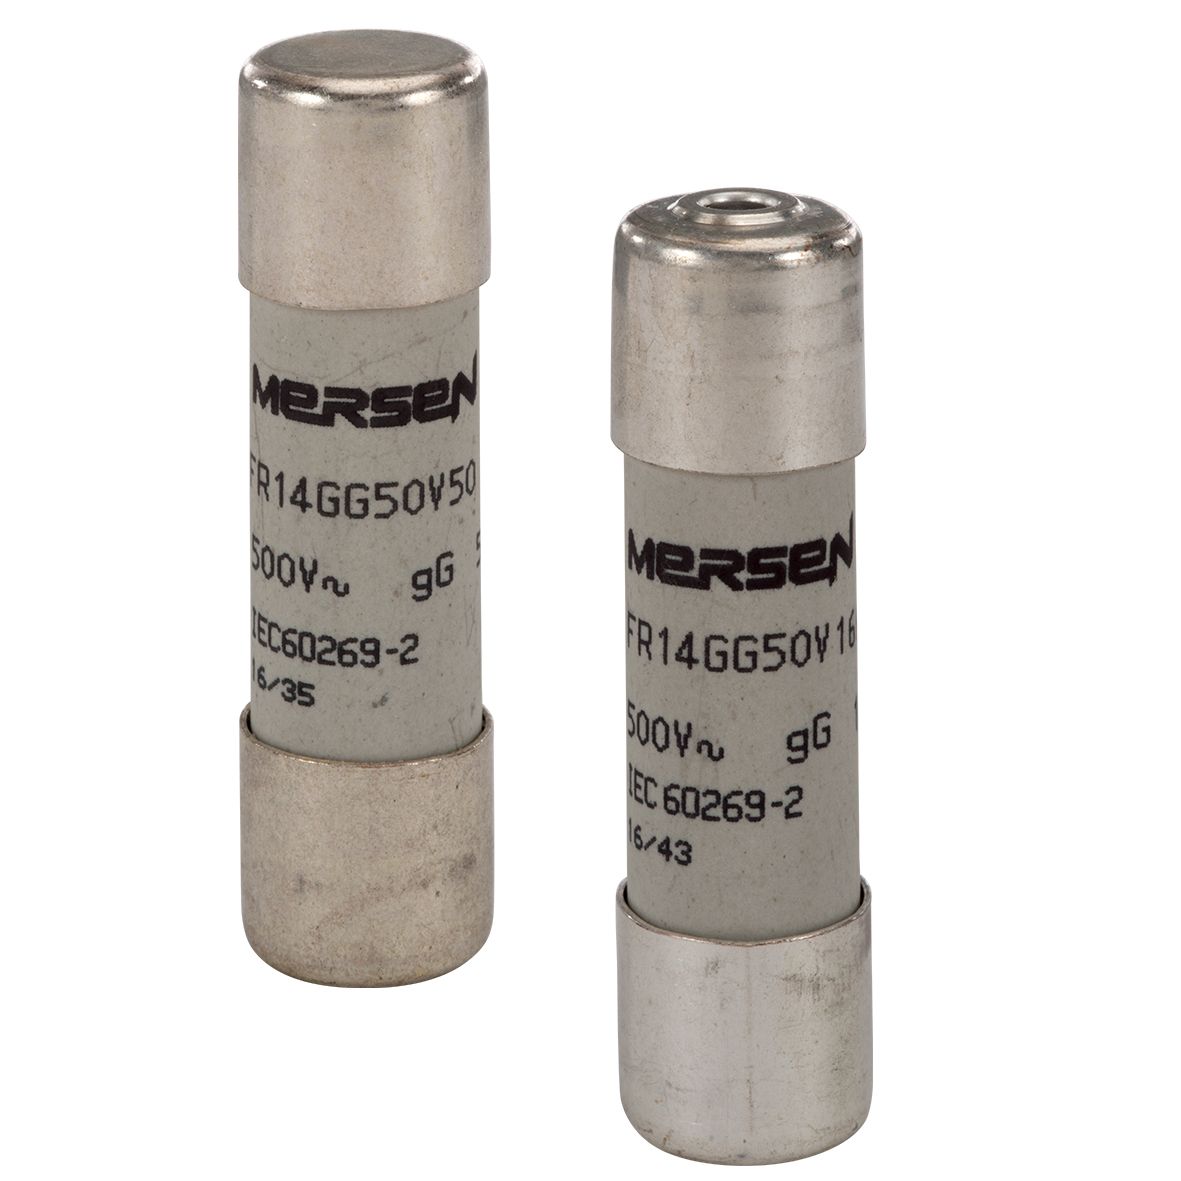 A211554 - Cylindrical fuse-link gG 690VAC 14.3x51, 16A